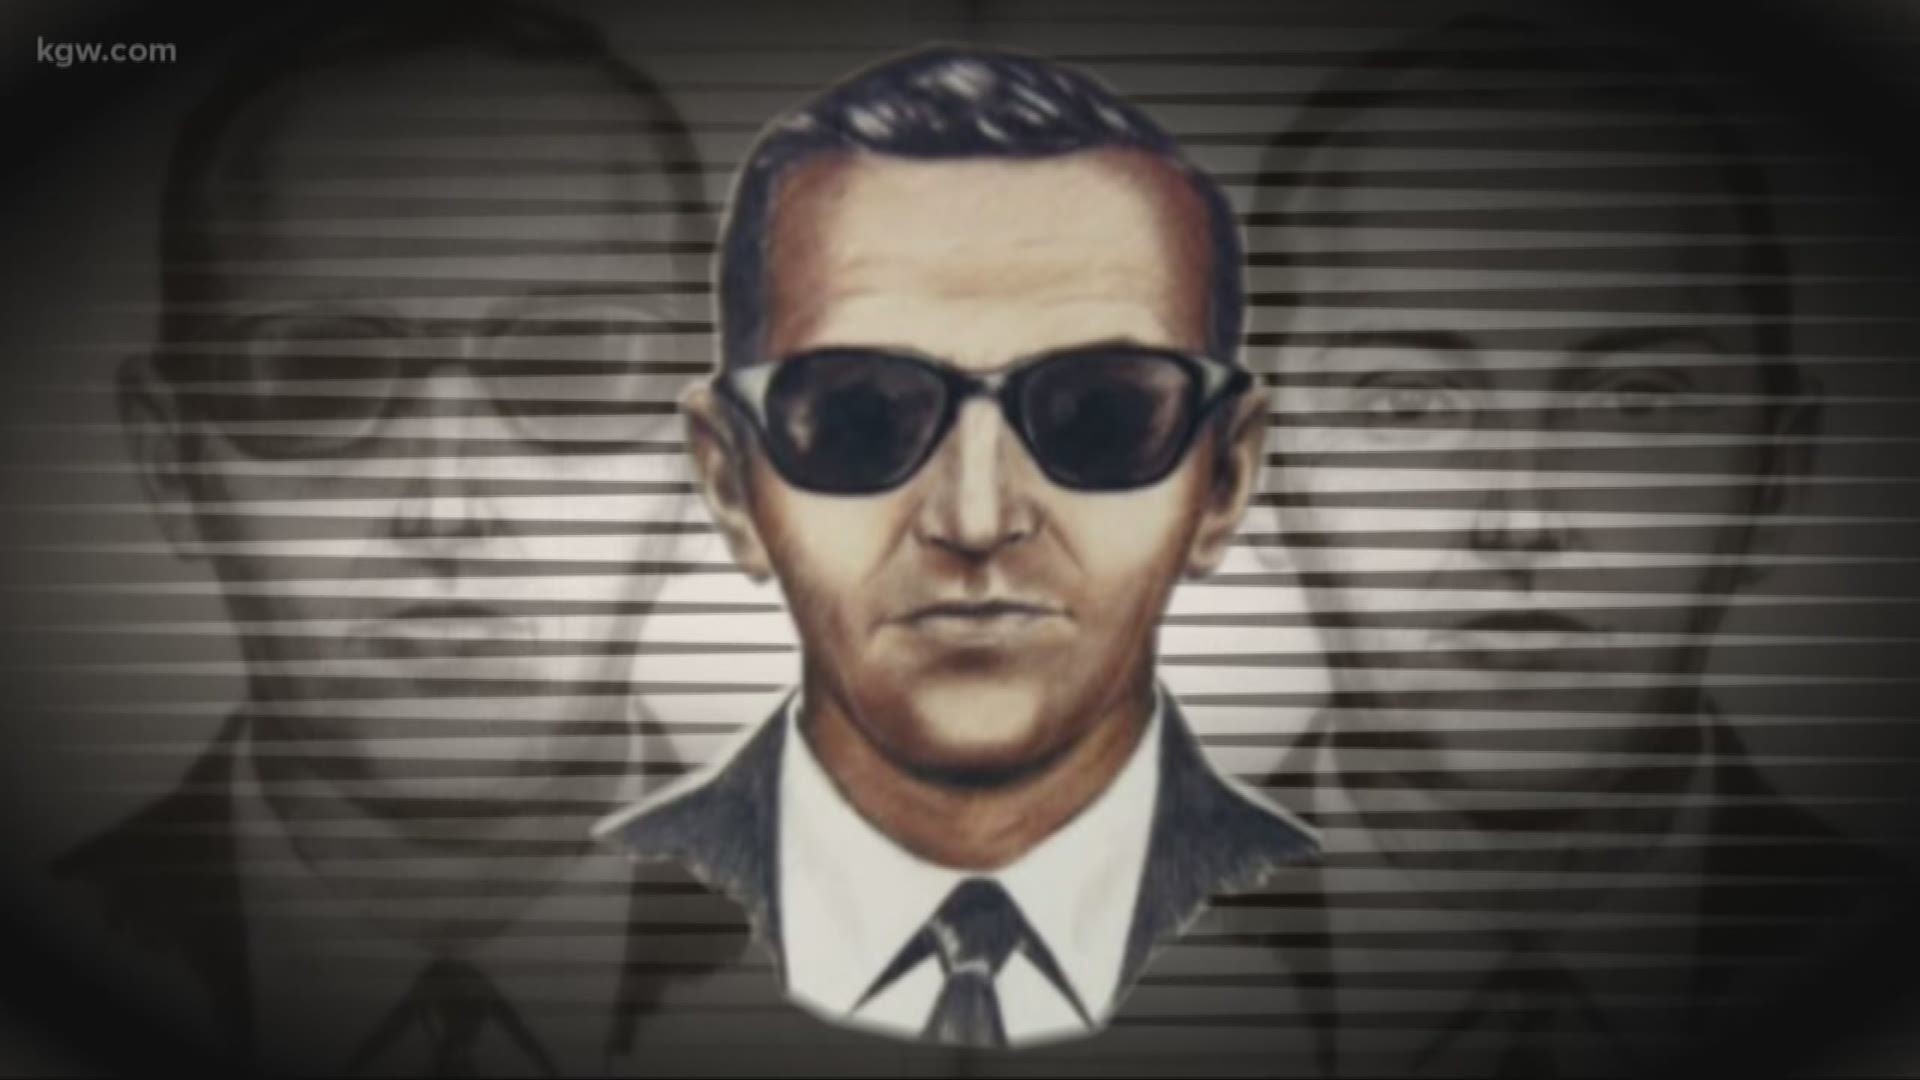 Aviation and mystery lovers banded together on Saturday to talk about a common obsession and an infamous legend: D.B. Cooper.